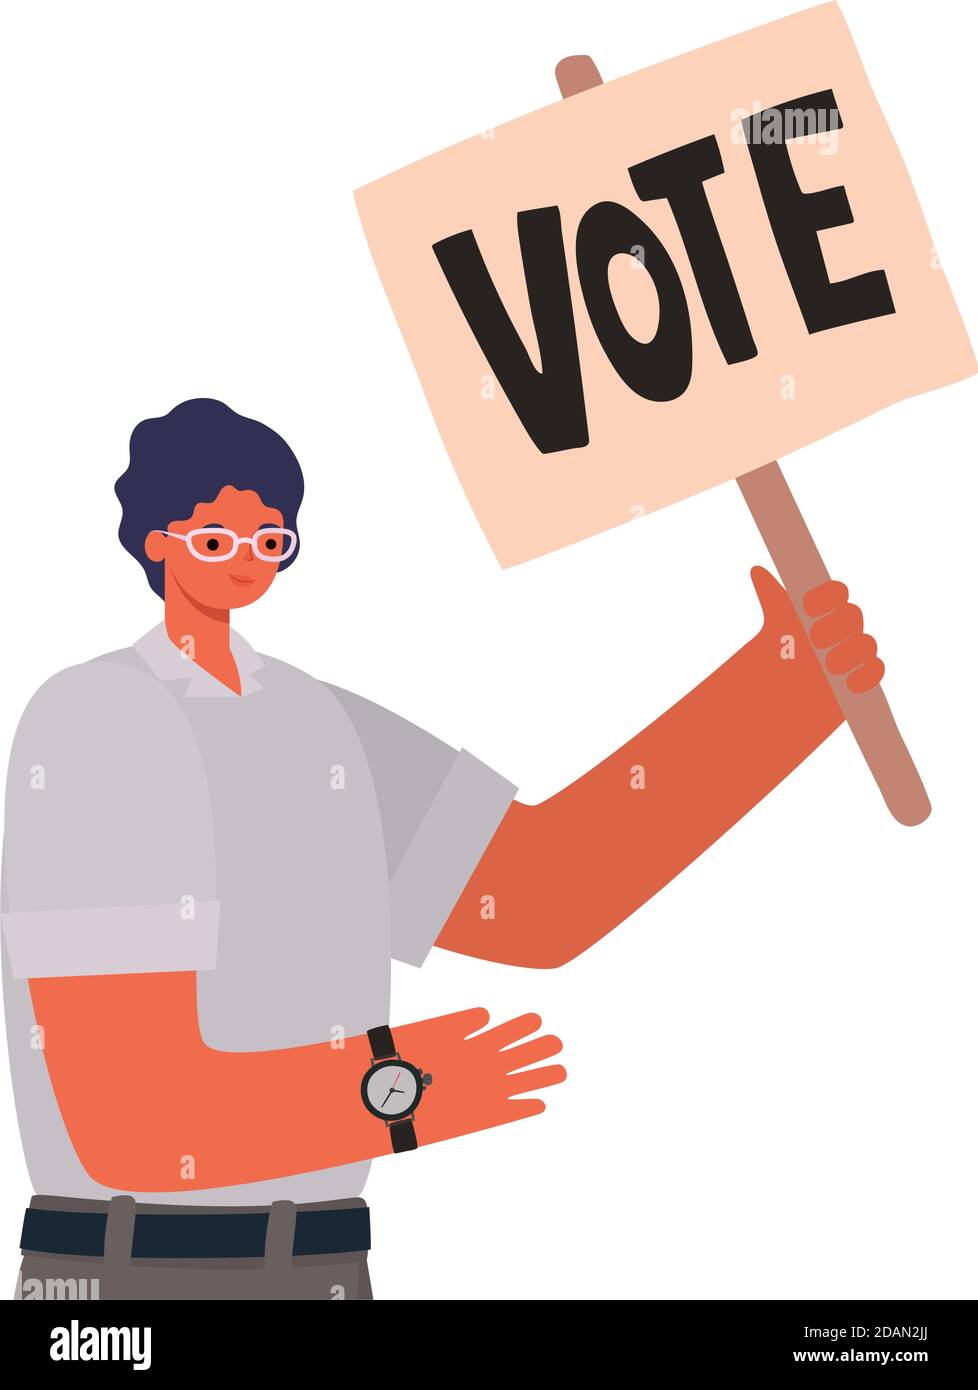 man with black hair, whithe shirt and a poster vote Stock Vector